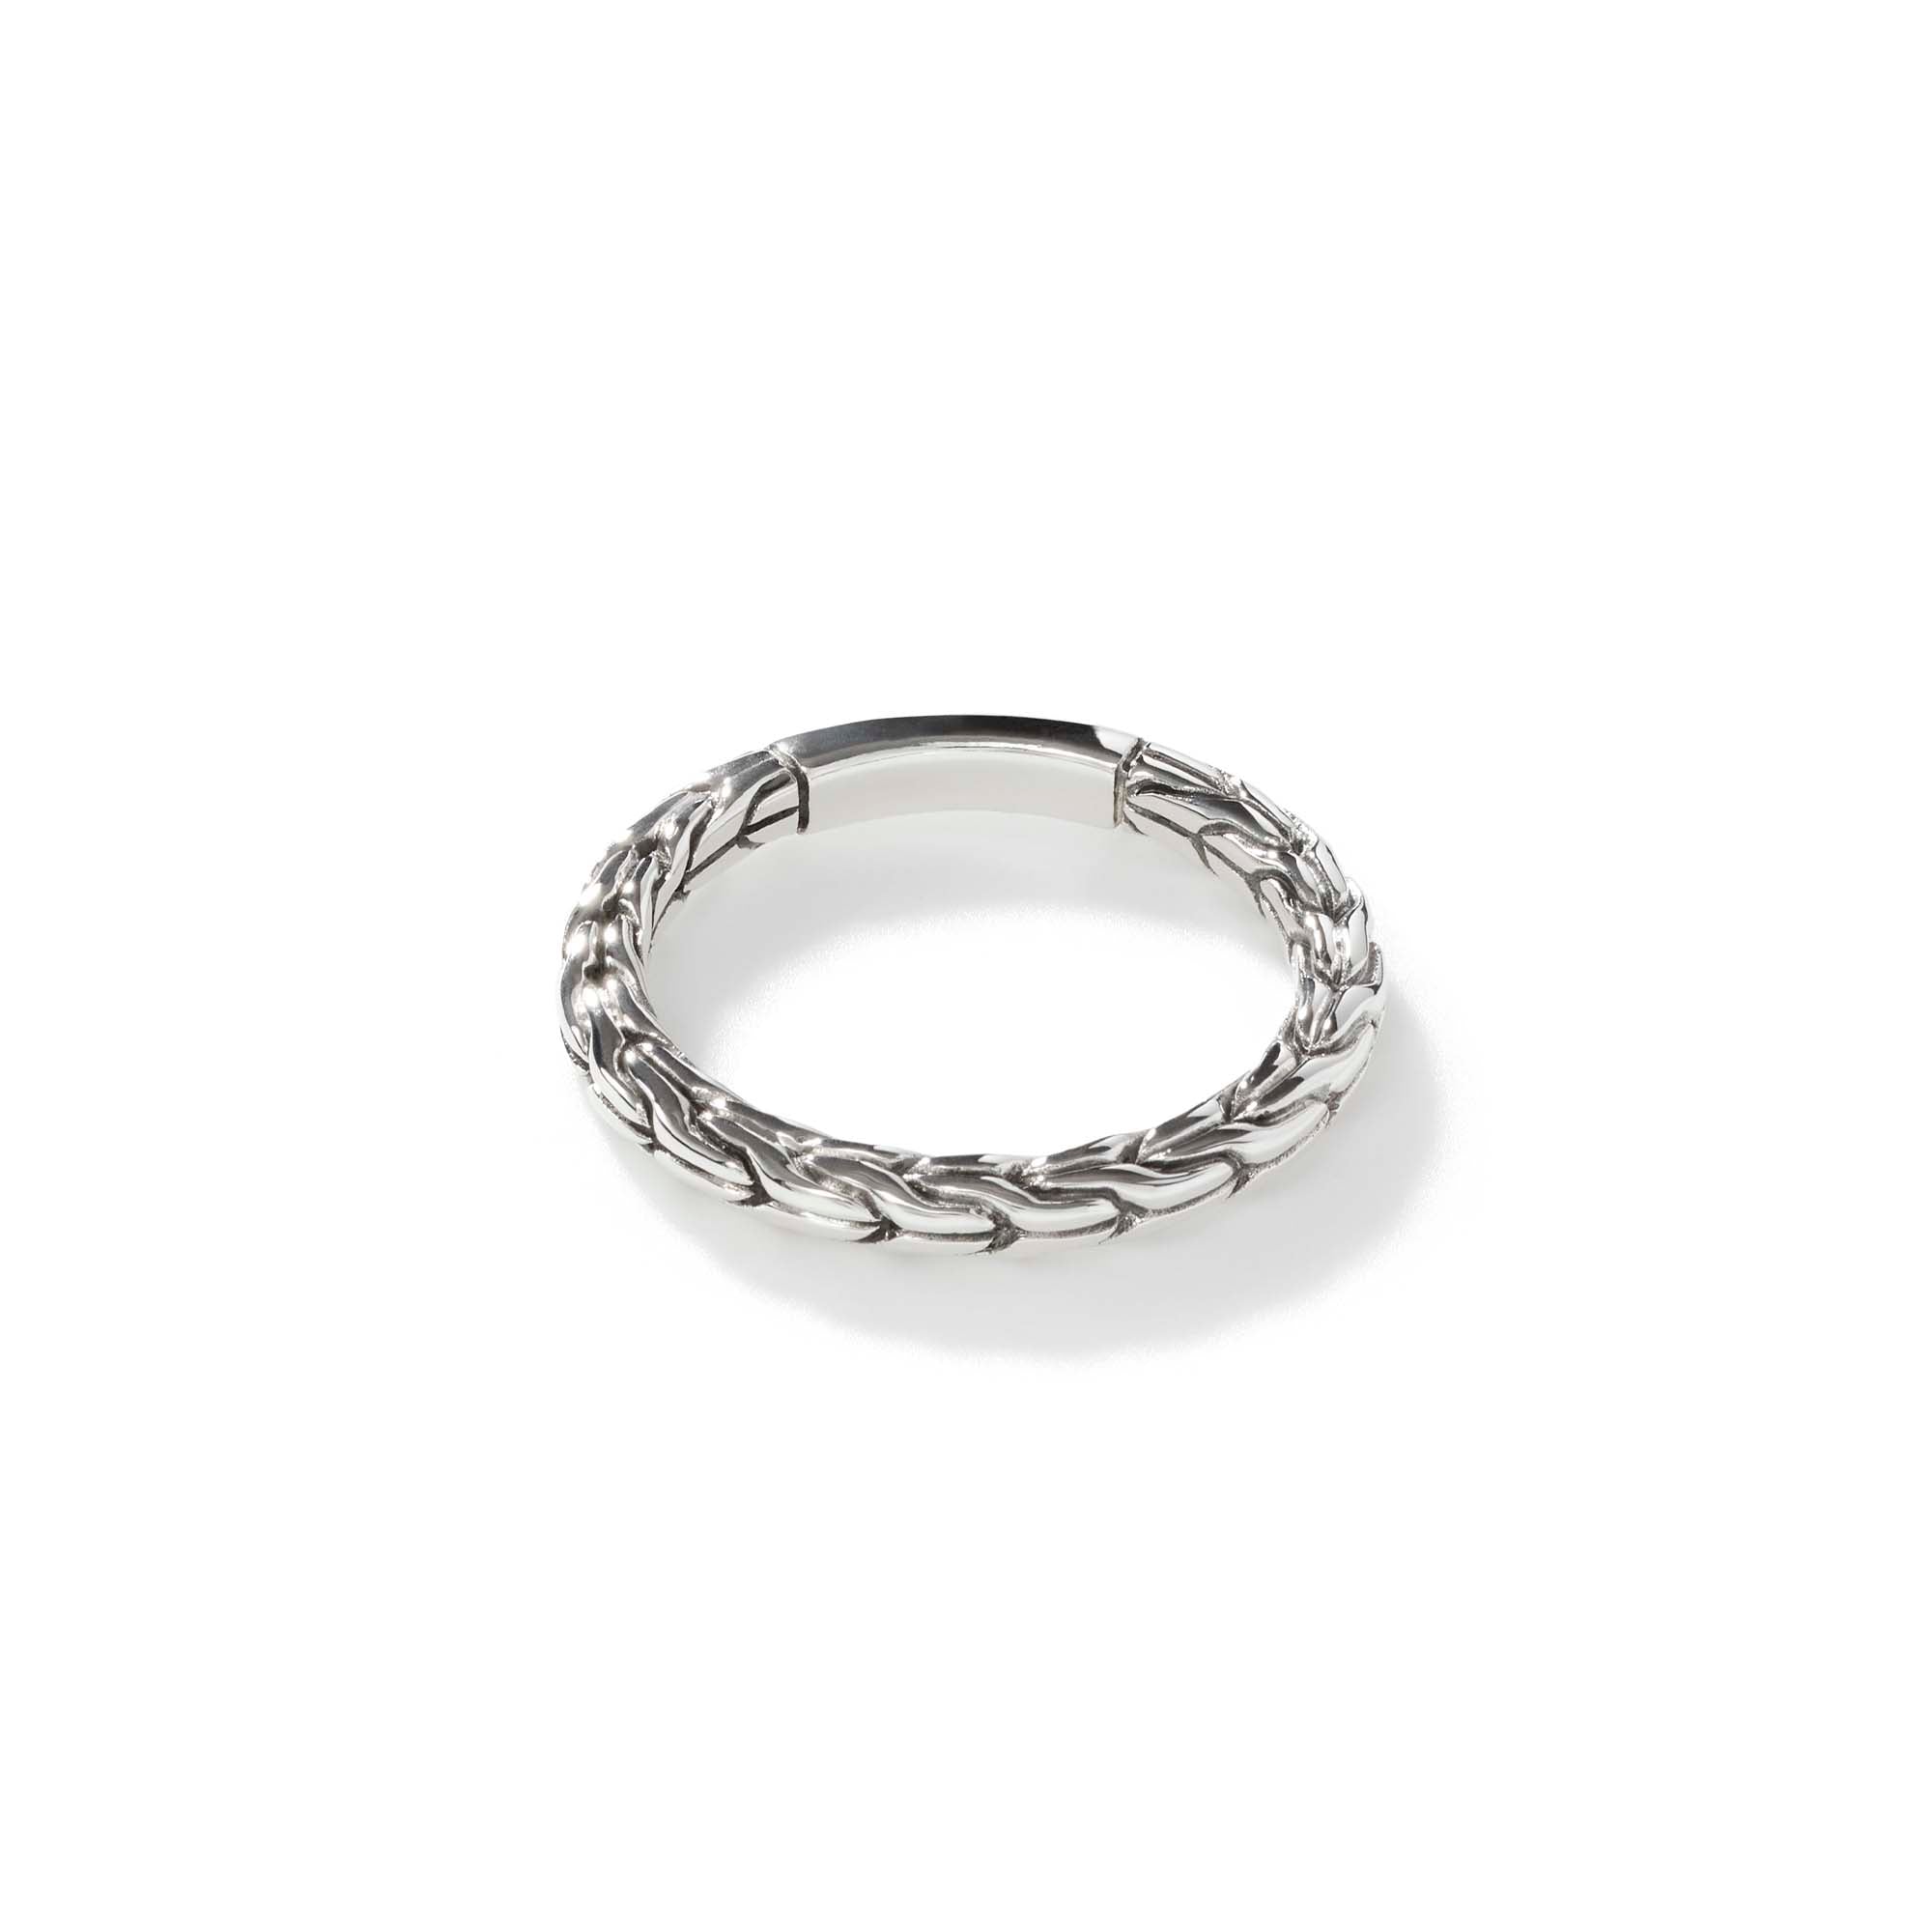 Carved Chain Band Ring, Sterling Silver, Slim|RB90365 – John Hardy